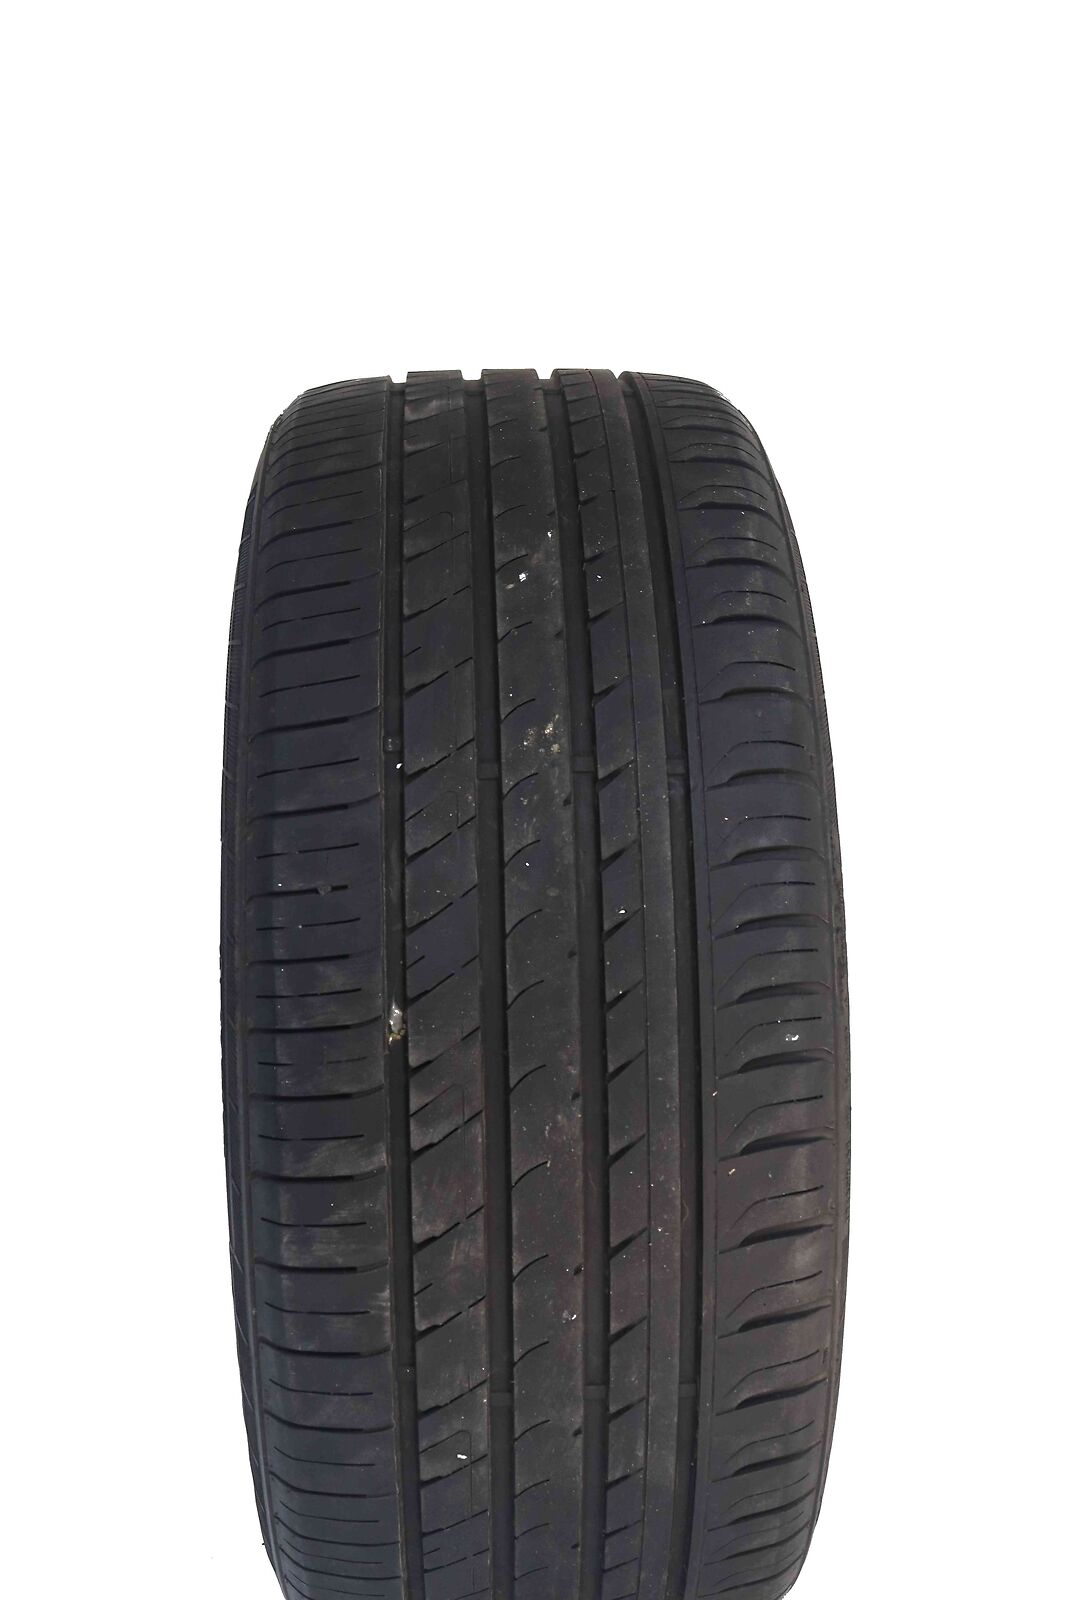 P235/50R17 Atlander AX88 100 W Used 6/32nds